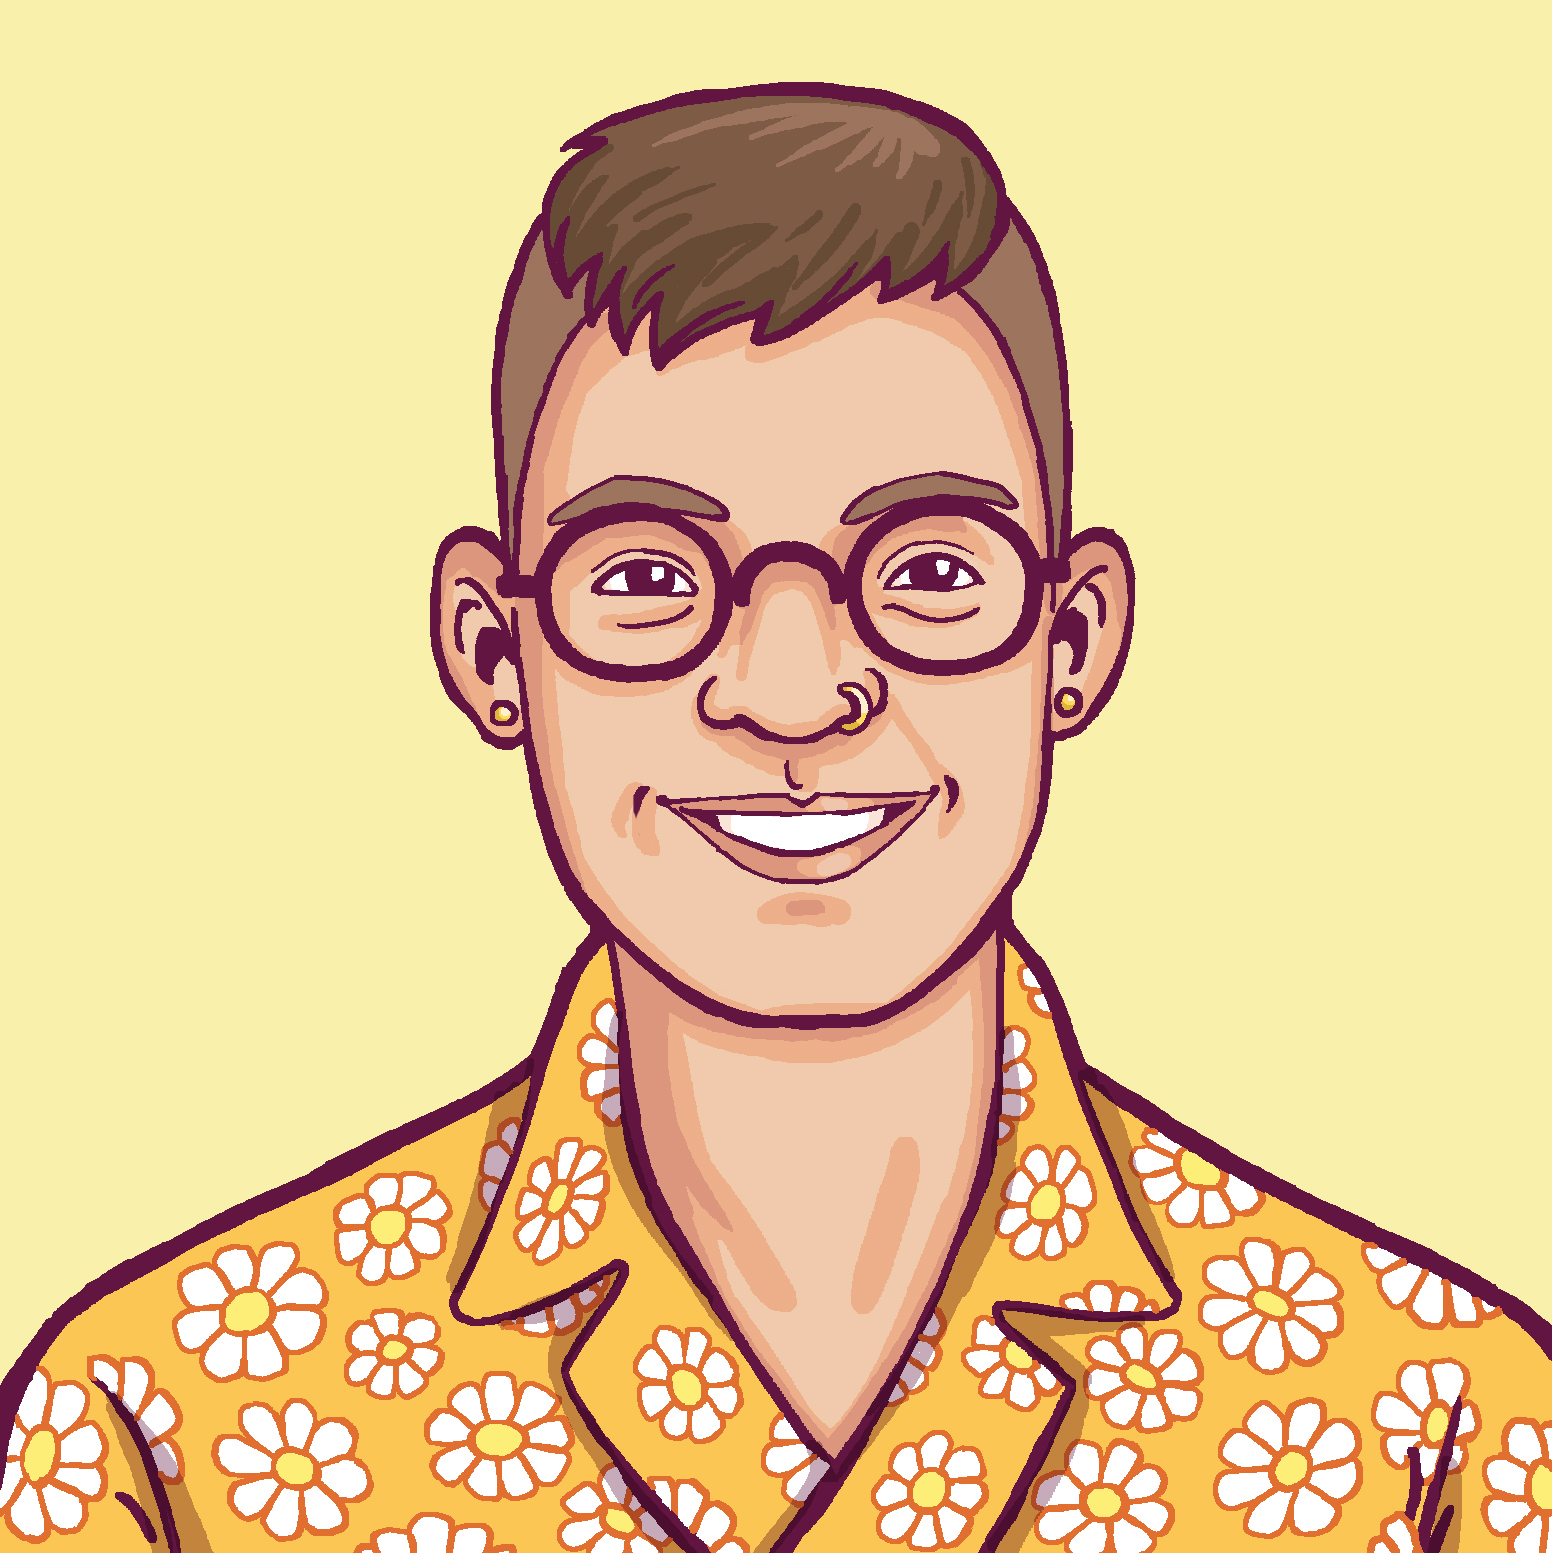 A cartoon of Flourish Klink, a white person wearing round glasses and a collared shirt.